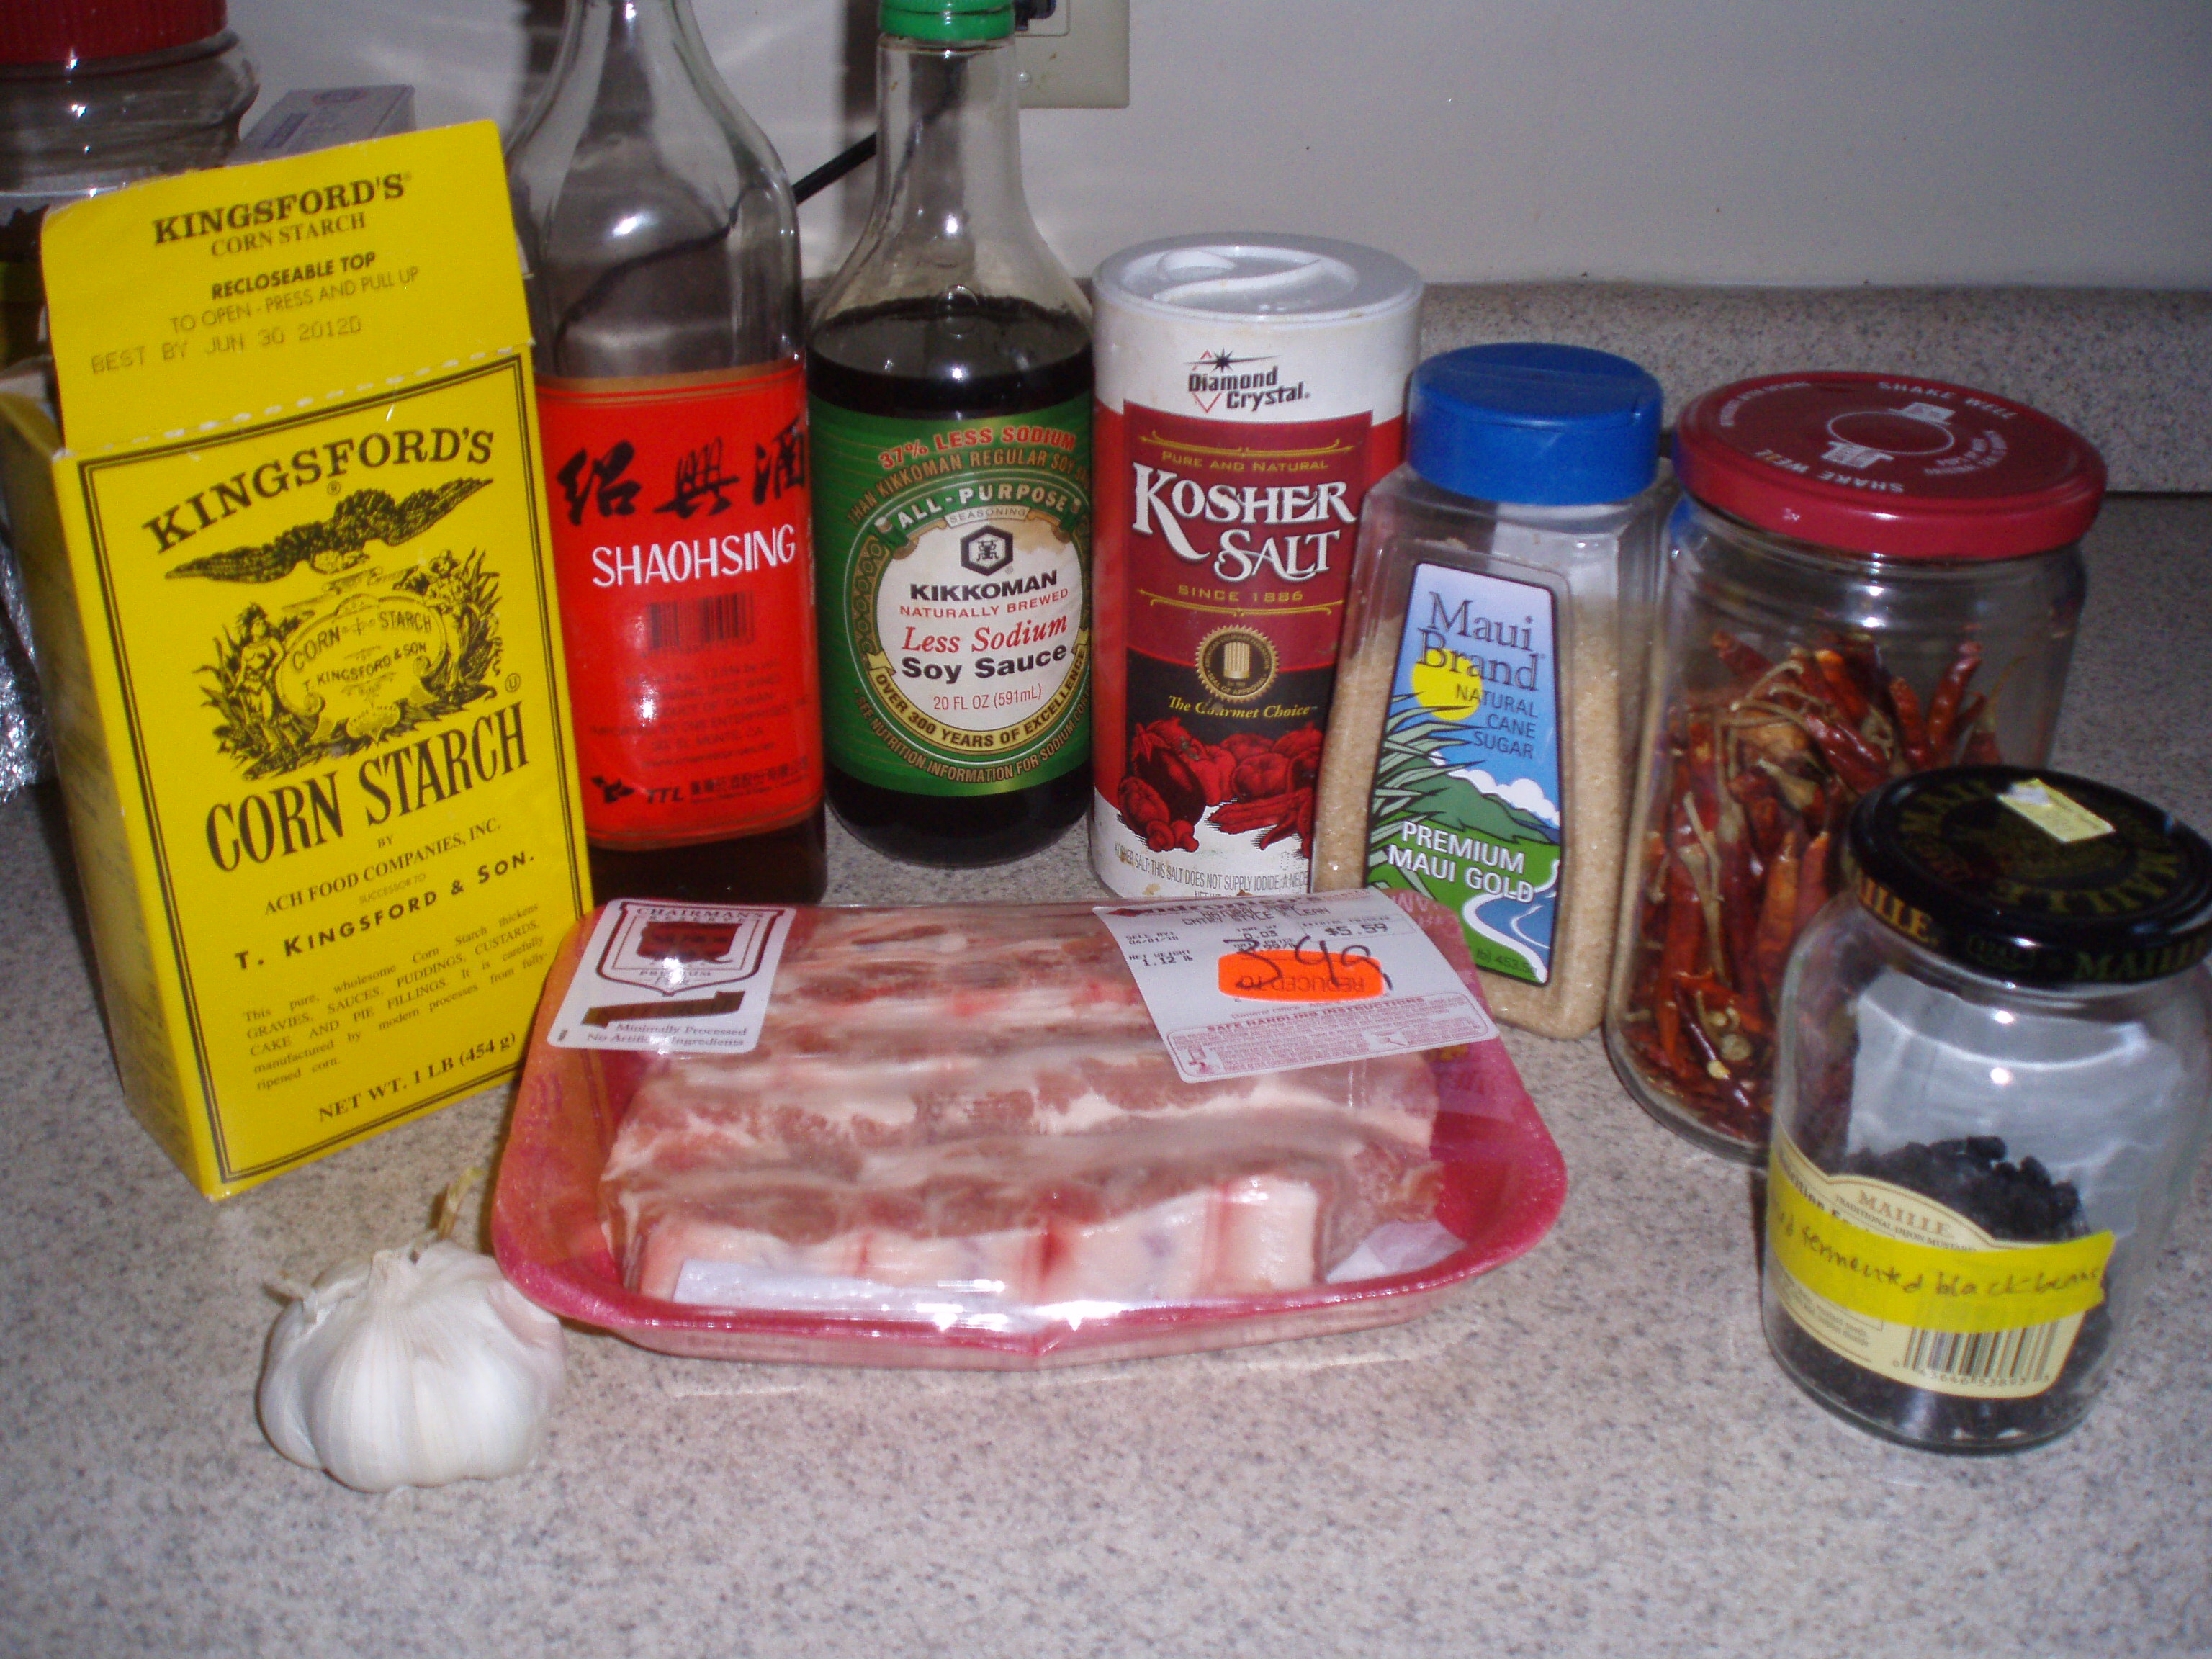 The sauce is made by stir-frying the (soaked and cleaned) black beans with